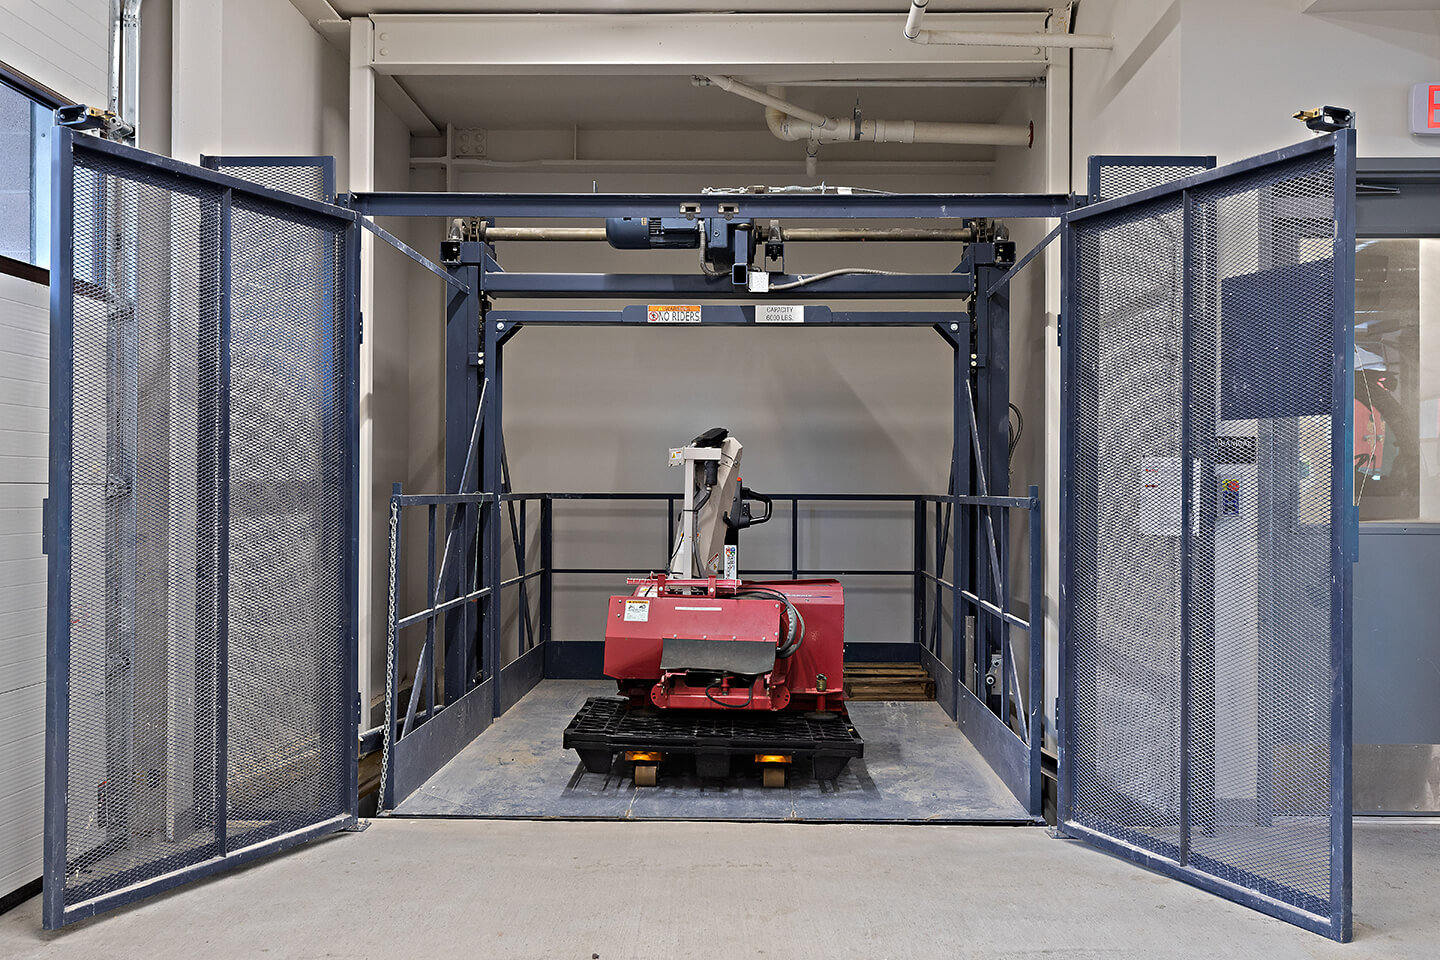 Equipment elevator with red duster